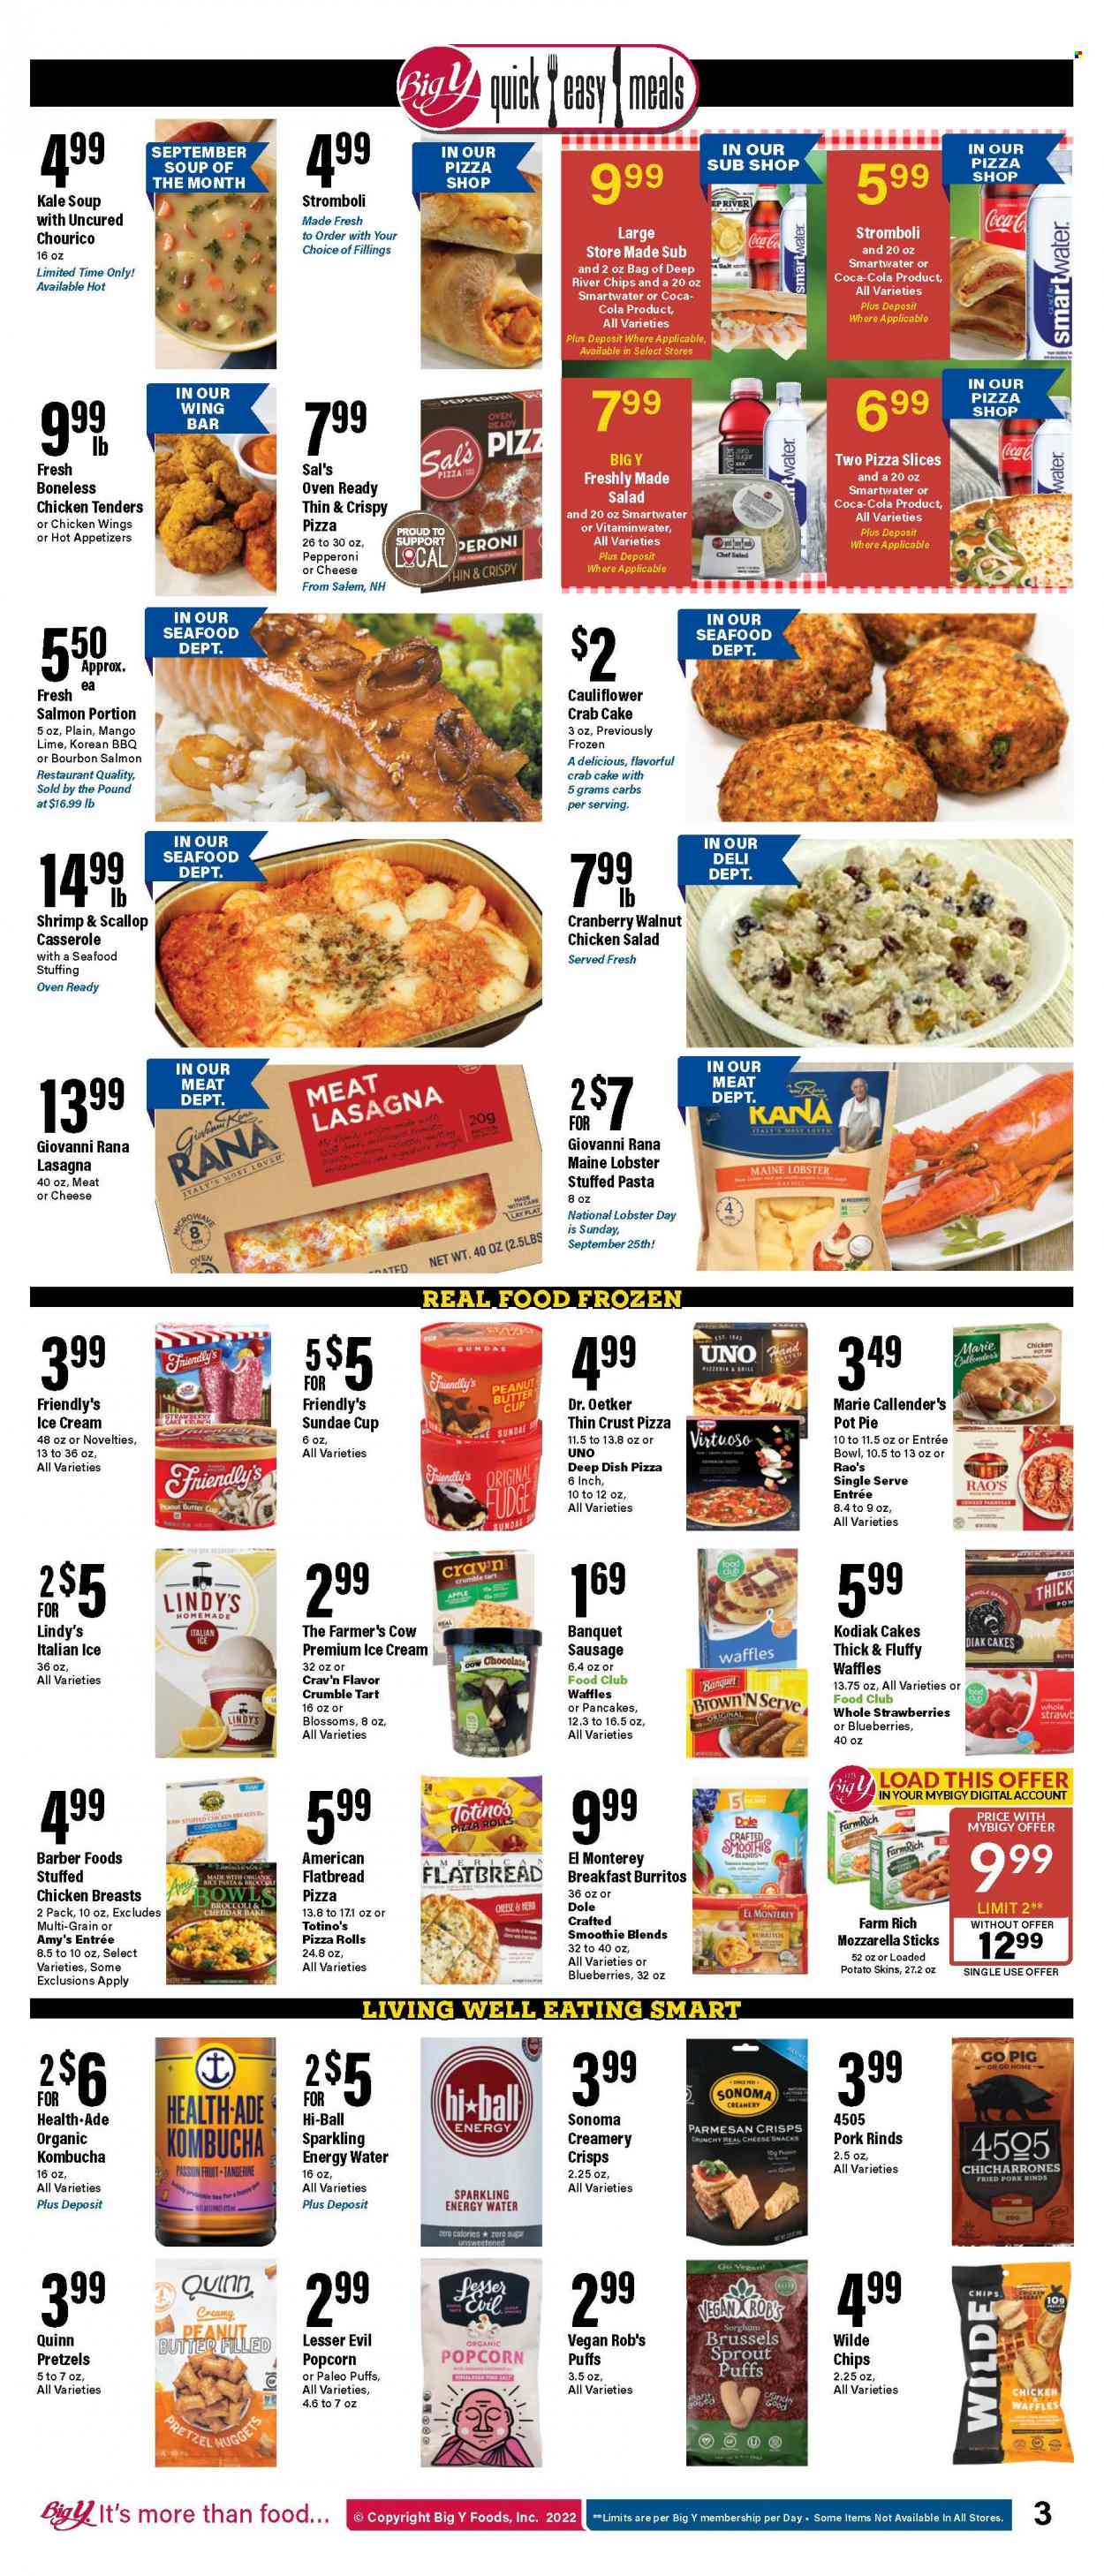 thumbnail - Big Y Flyer - 09/22/2022 - 09/28/2022 - Sales products - pretzels, pie, pizza rolls, tart, flatbread, pot pie, puffs, crumble tart, waffles, broccoli, kale, Dole, brussel sprouts, strawberries, lobster, salmon, scallops, seafood, crab, shrimps, ravioli, pizza, chicken tenders, soup, nuggets, pasta, burrito, lasagna meal, Giovanni Rana, Marie Callender's, Rana, stuffed chicken, sausage, pepperoni, chicken salad, Dr. Oetker, ice cream, Friendly's Ice Cream, chicken wings, fudge, snack, peanut butter cups, popcorn, pesto, peanut butter, Coca-Cola, smoothie, Smartwater, kombucha, tea, Peroni. Page 4.